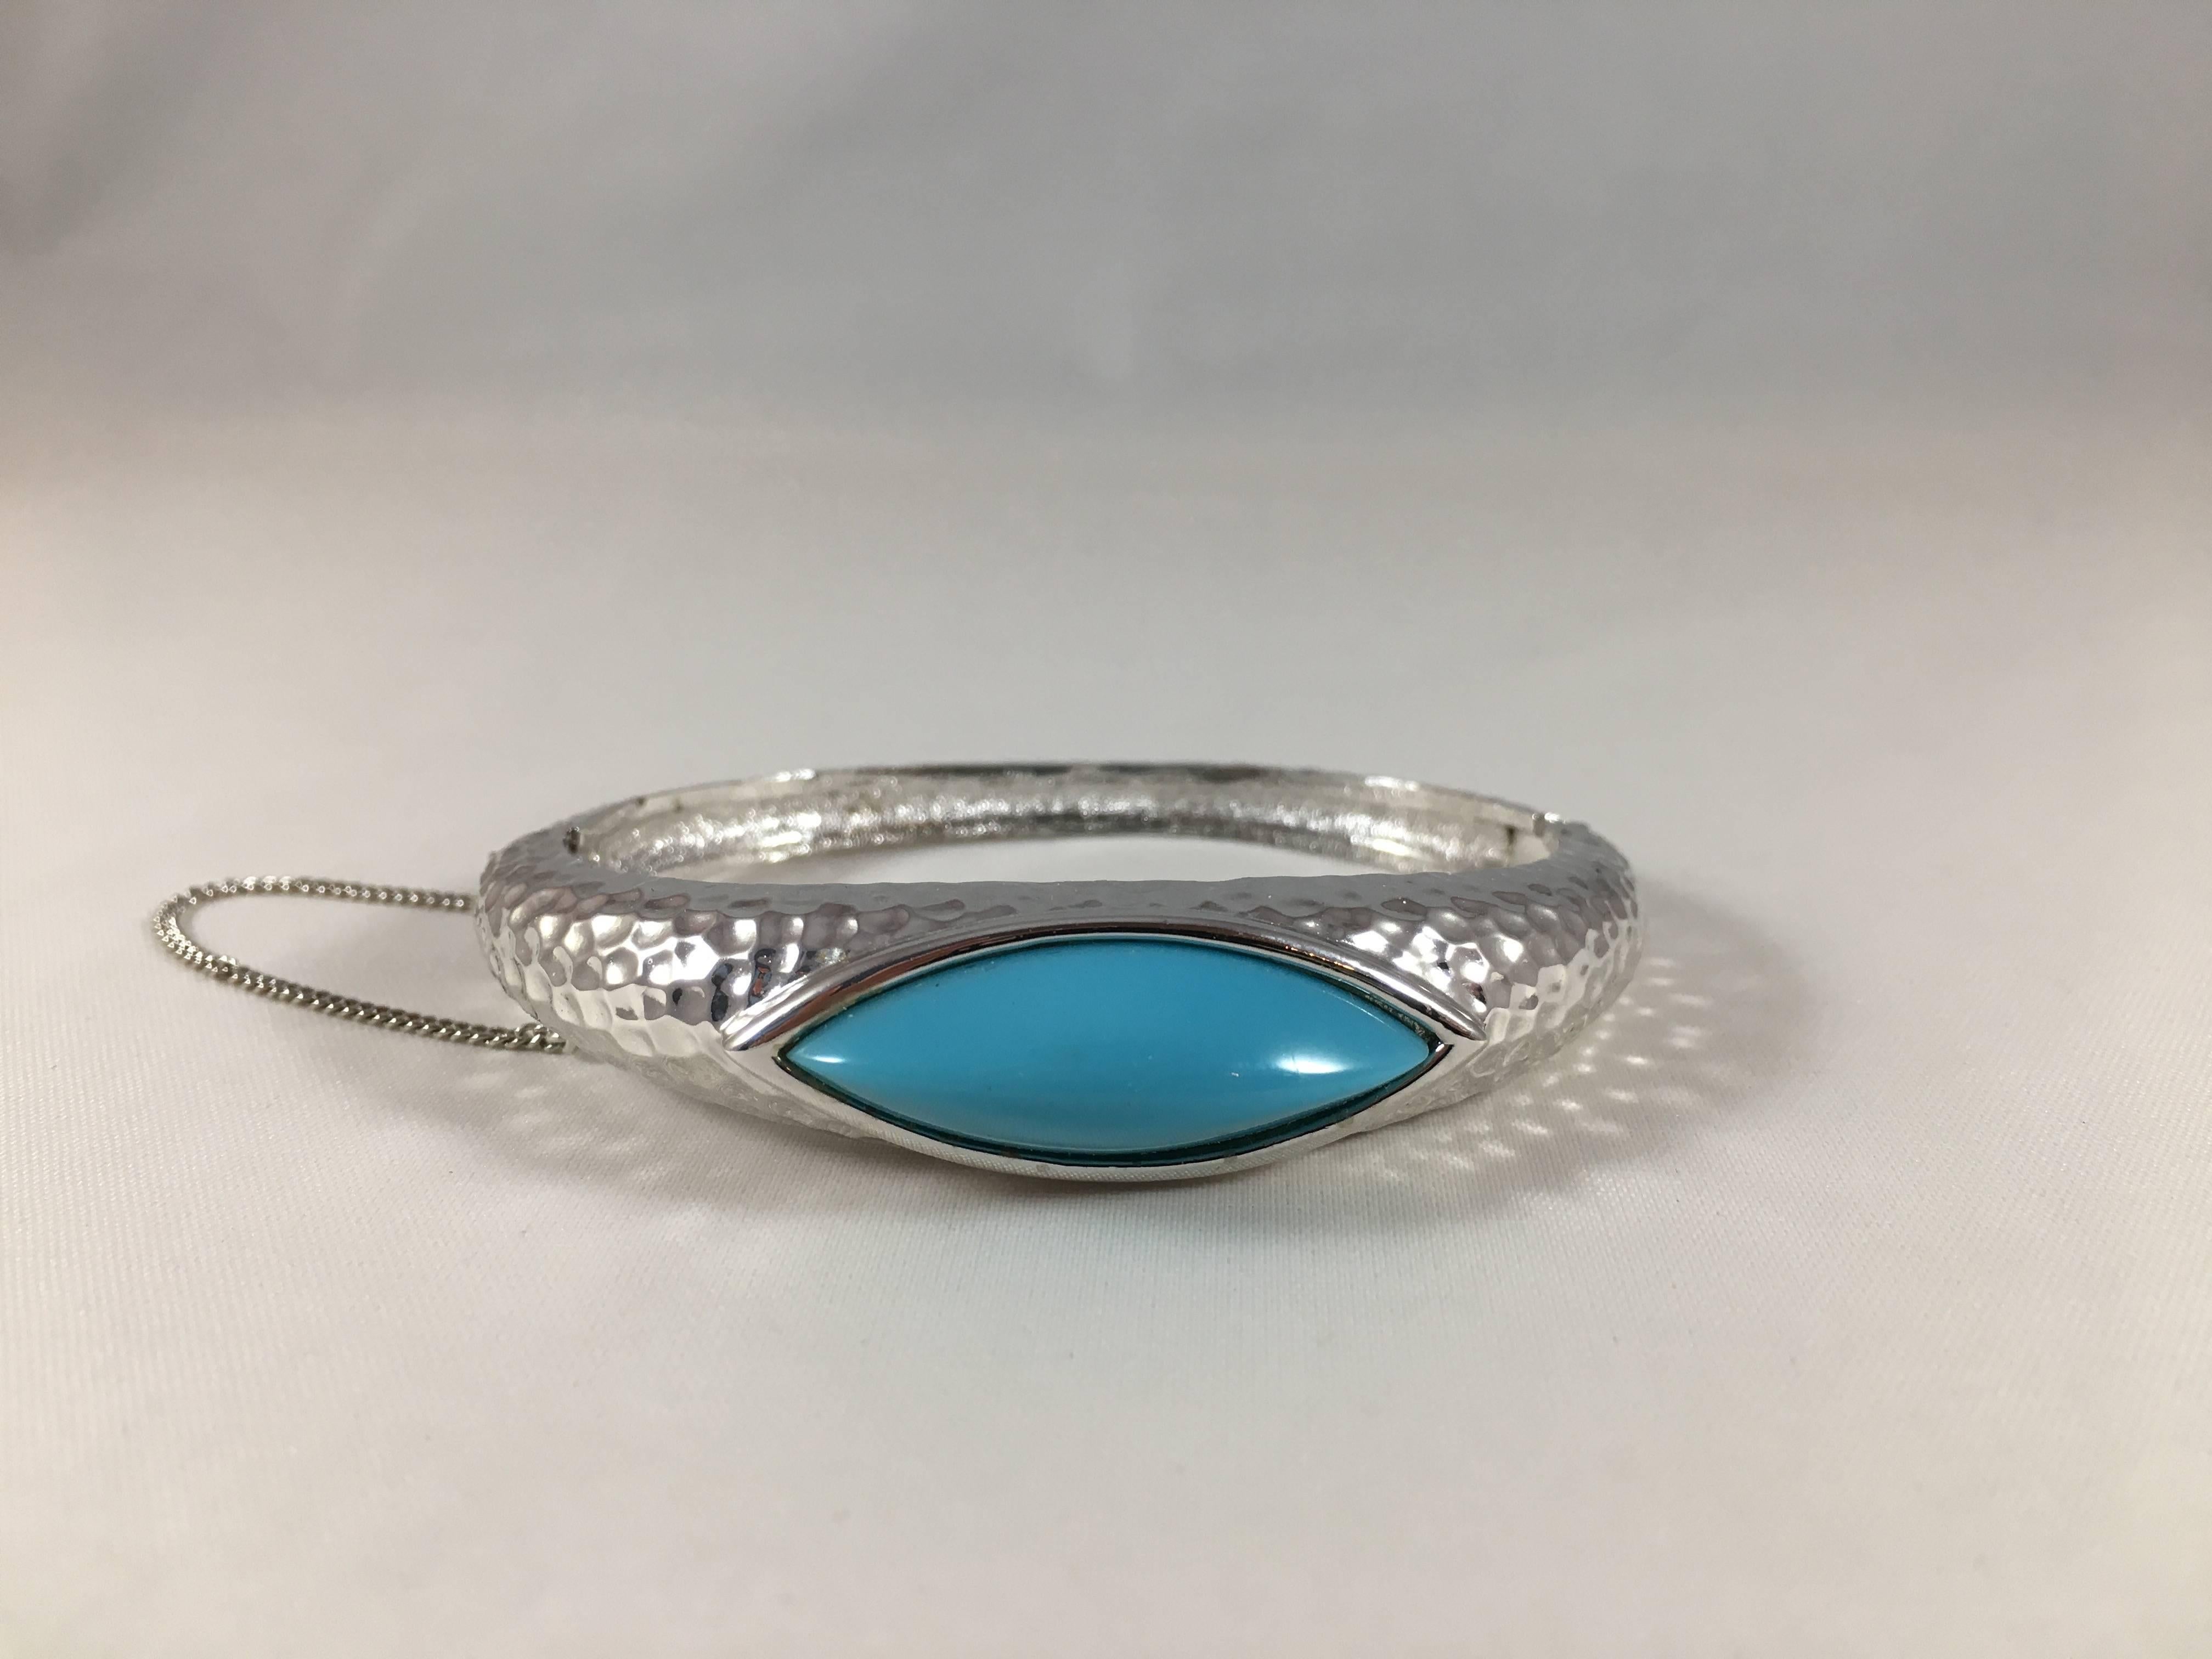 This is a Panetta bracelet from the 1970s with original tags. It features a faux turquoise cabochon stone set in a hammered silver-tone metal bracelet. It fastens at the side and is marked 'Panetta' on the inside (see image #7). It measures a 1/2